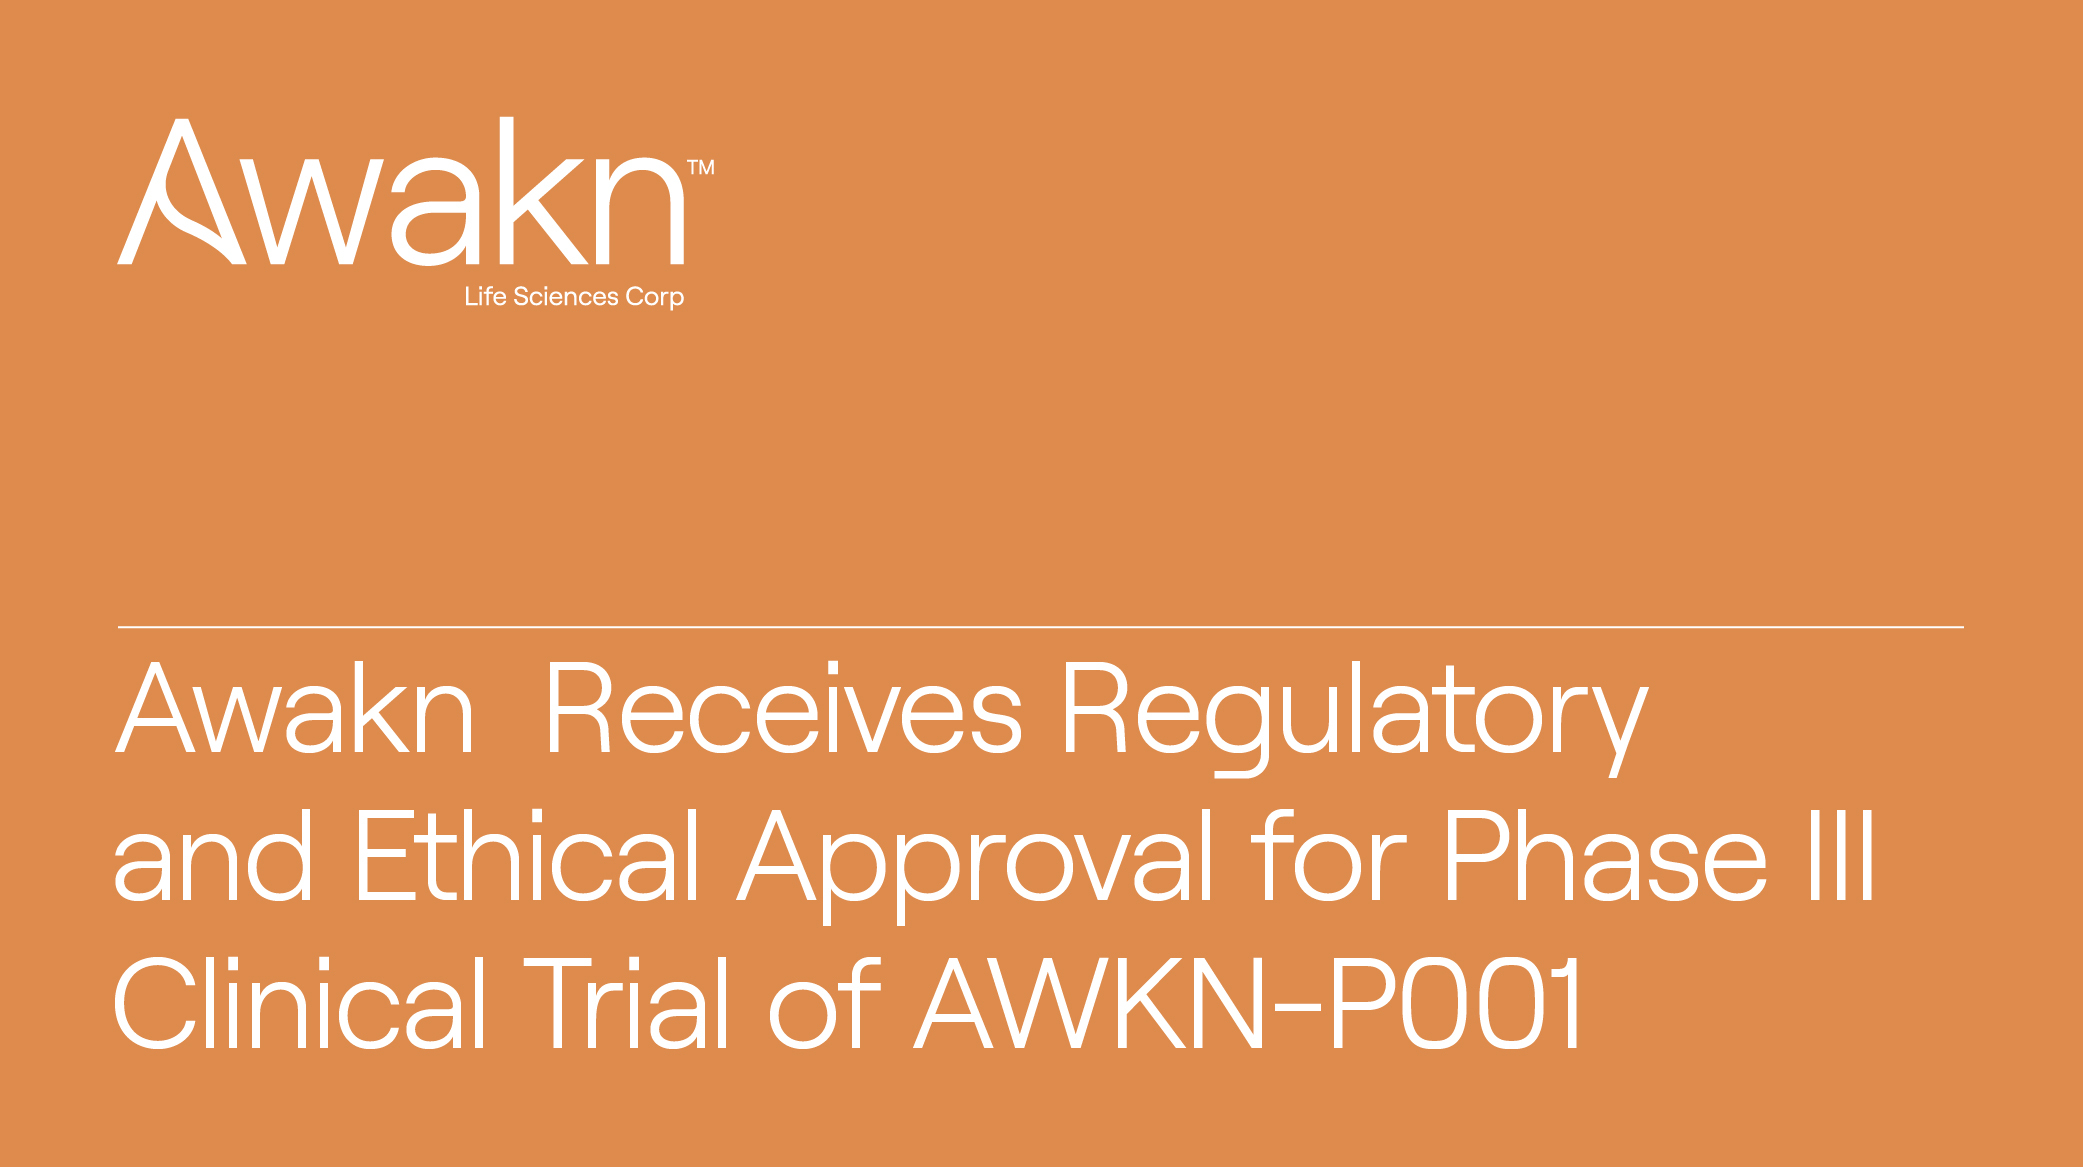 Awakn Life Sciences Receives Regulatory and Ethical Approval For Phase III Clinical Trial Of AWKN-P001